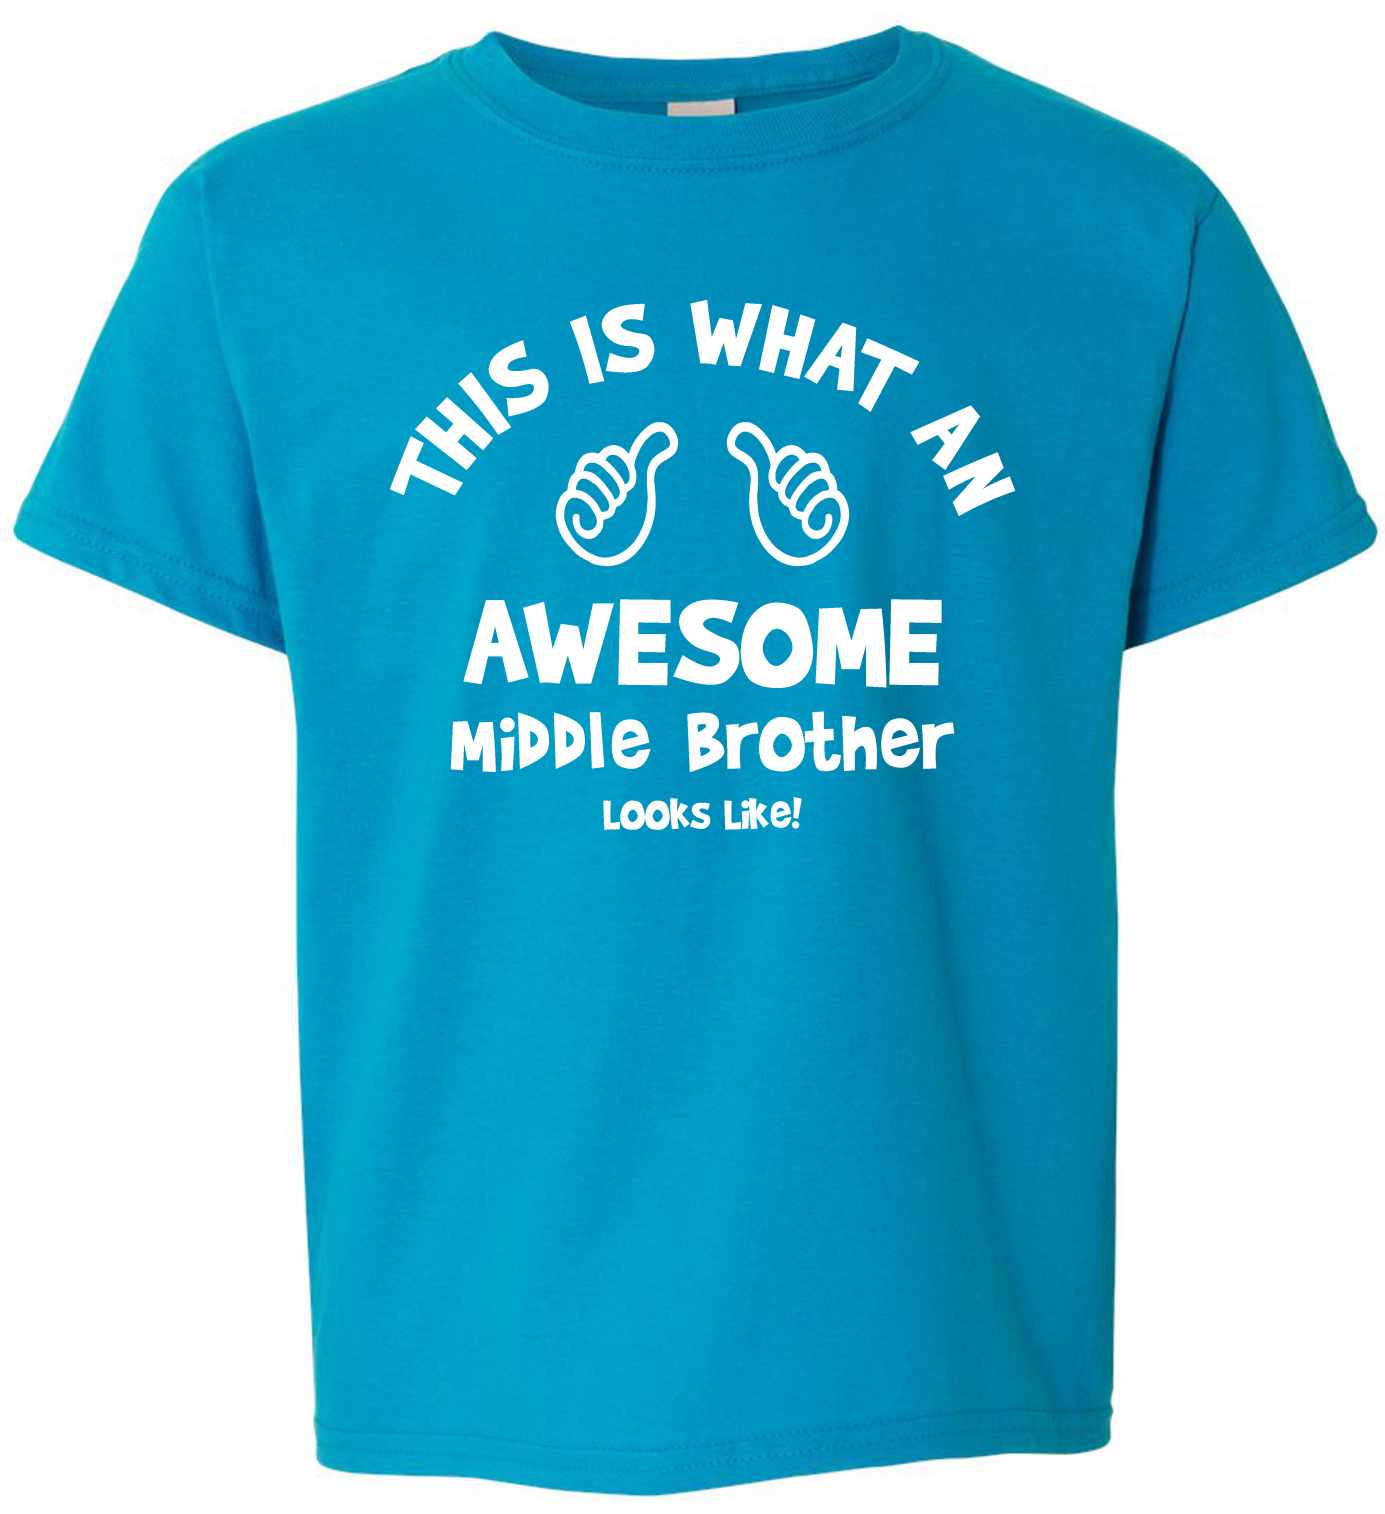 This Is What An Awesome Middle Brother Looks Like on Kids T-Shirt (#1094-201)